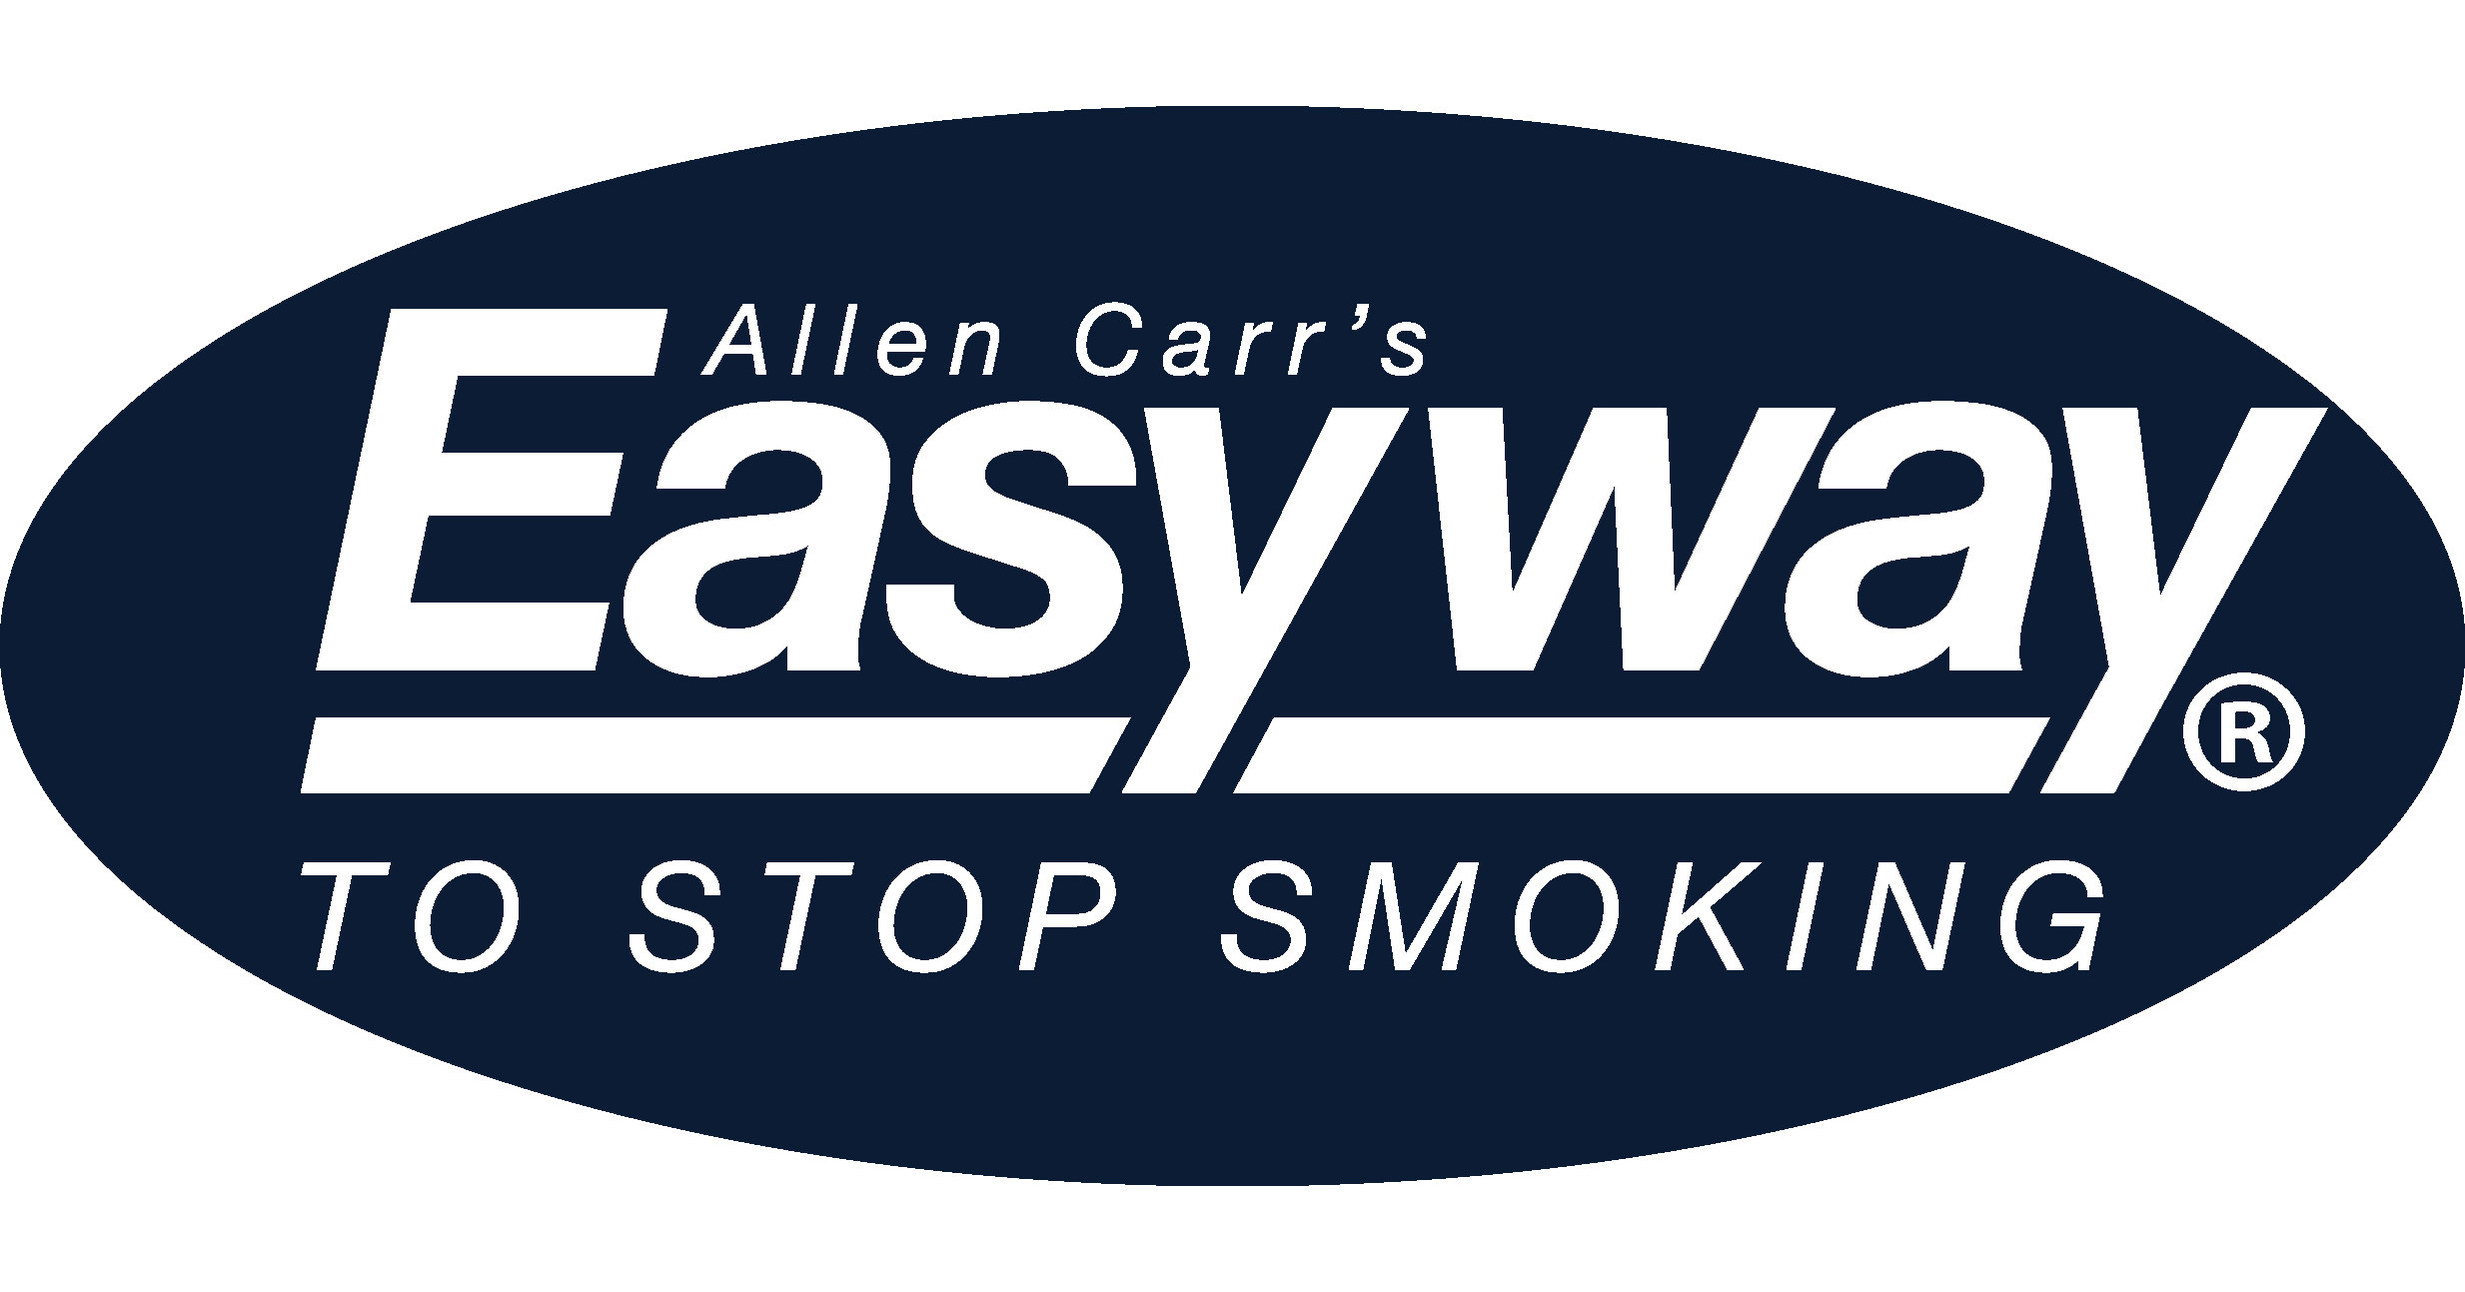 The effectiveness of Allen Carr's method for smoking cessation: A